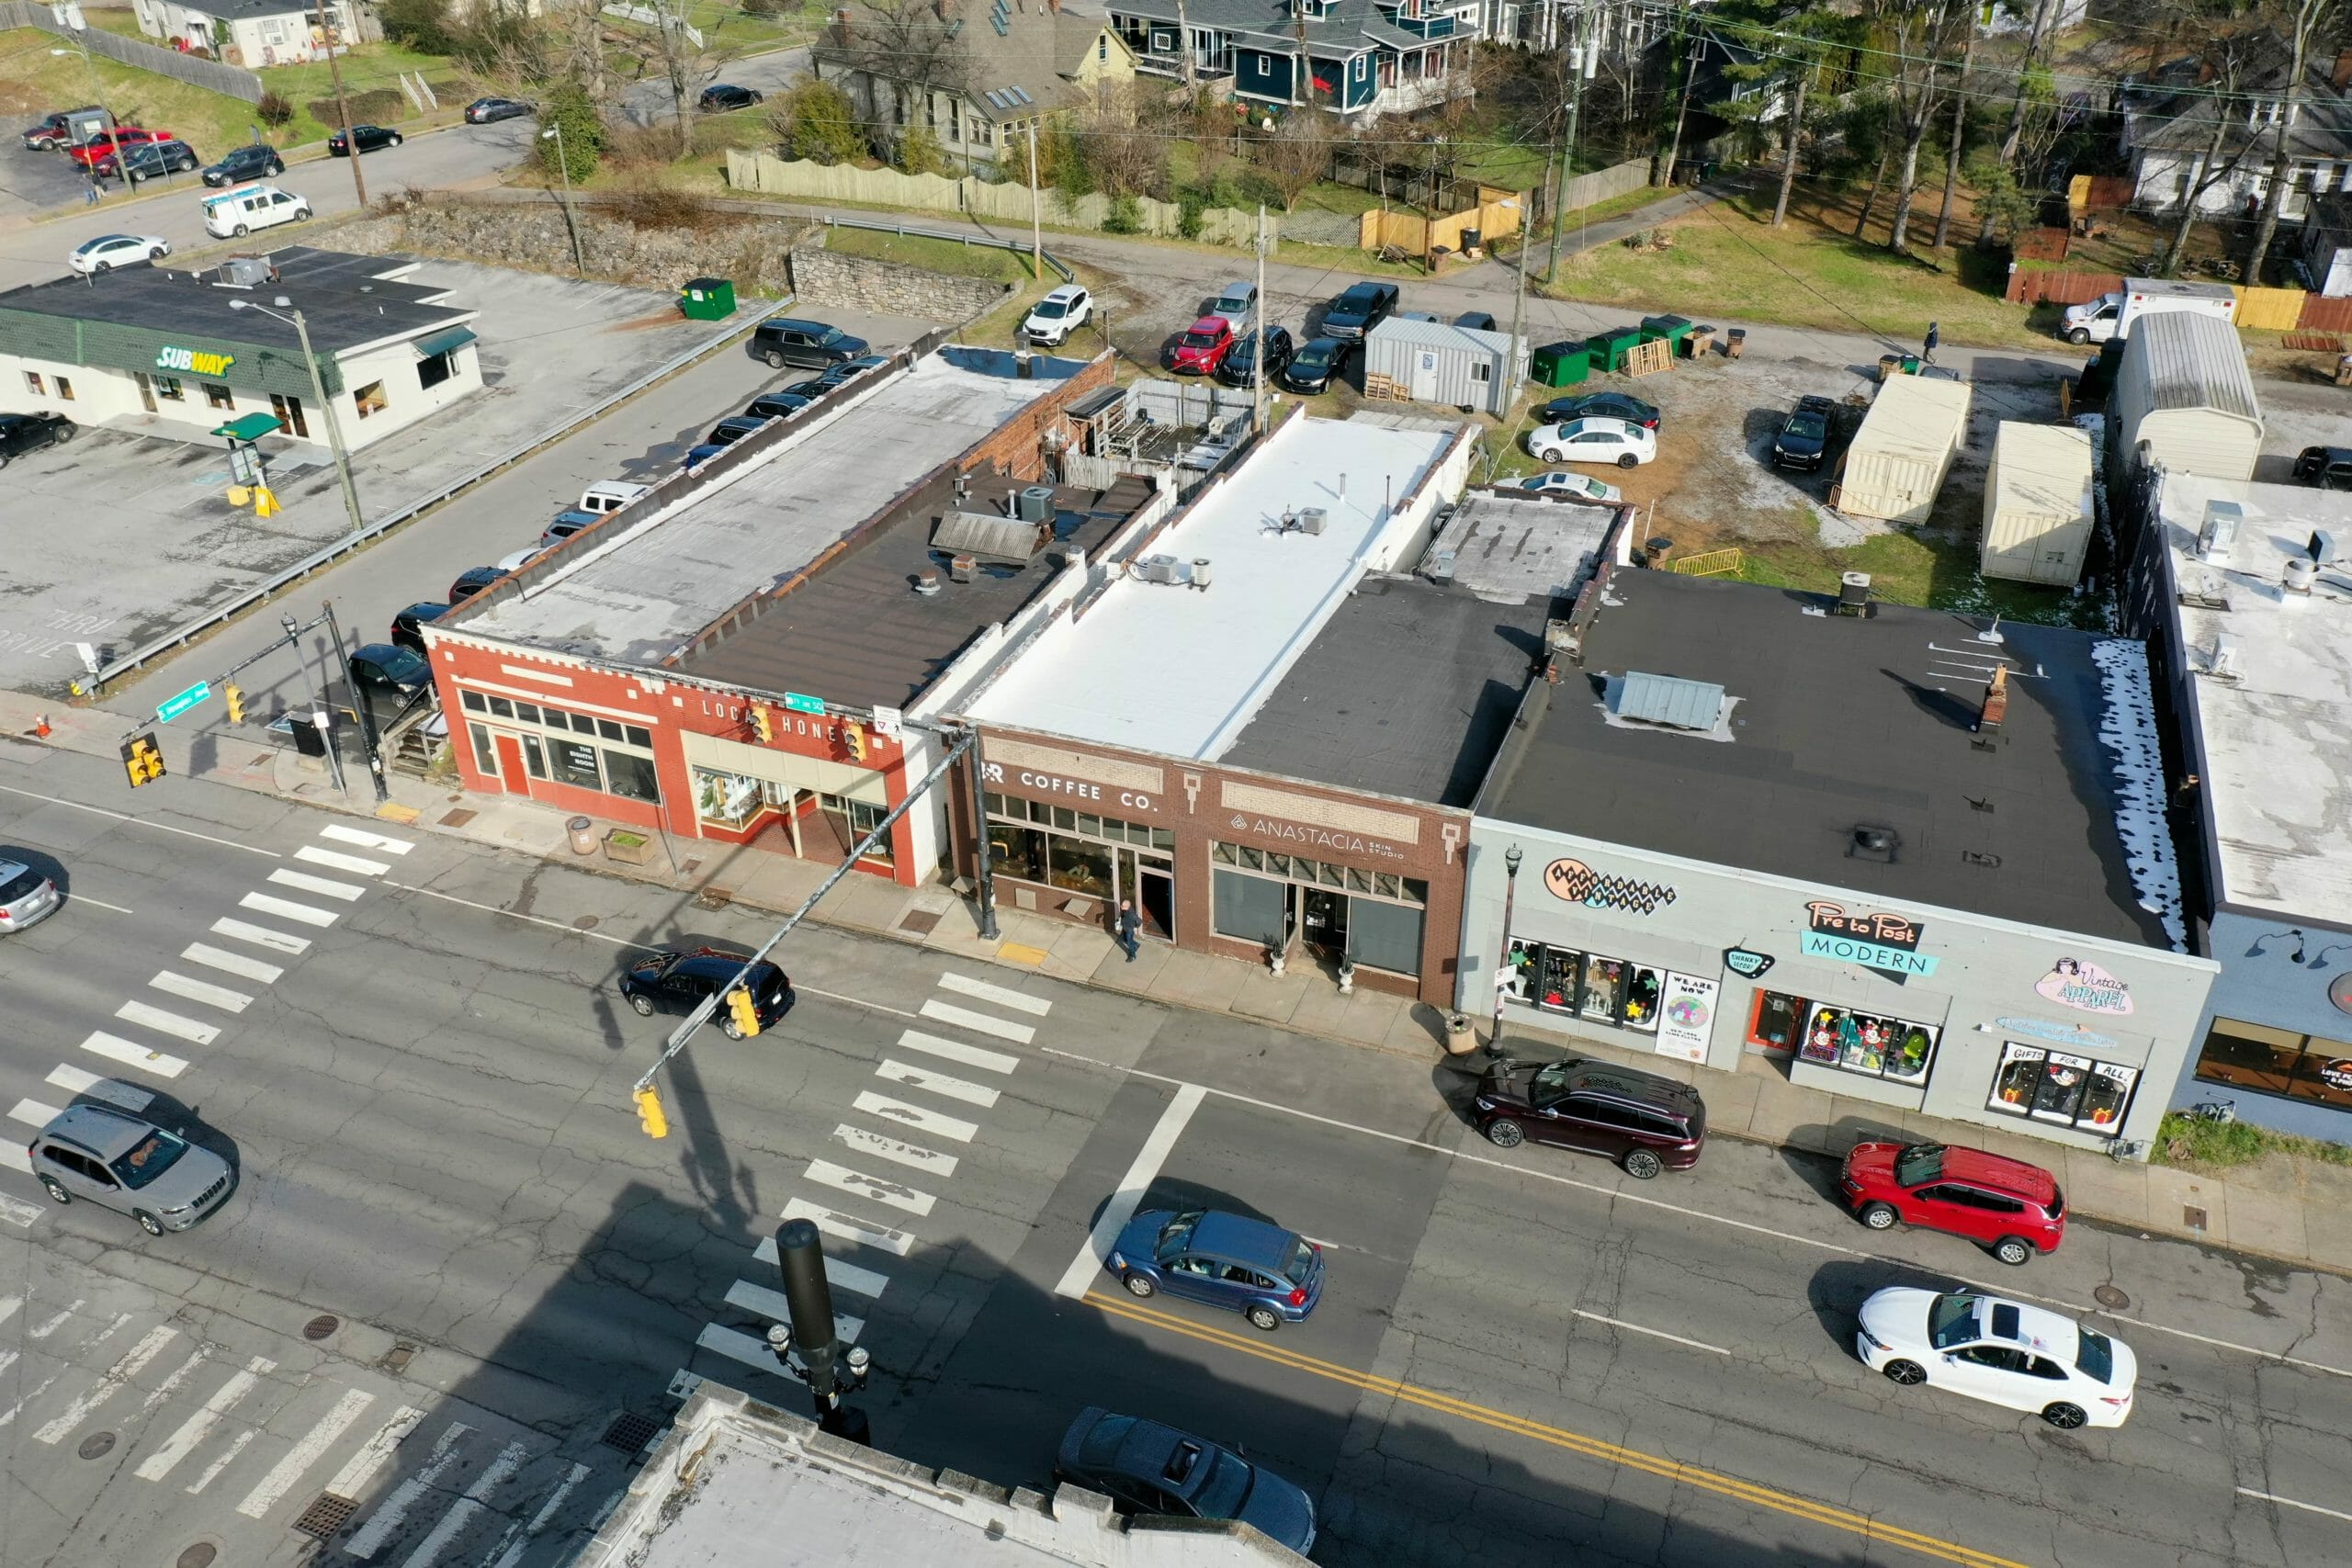 An aerial view of the 8th South reroofing project in Nashville, TN